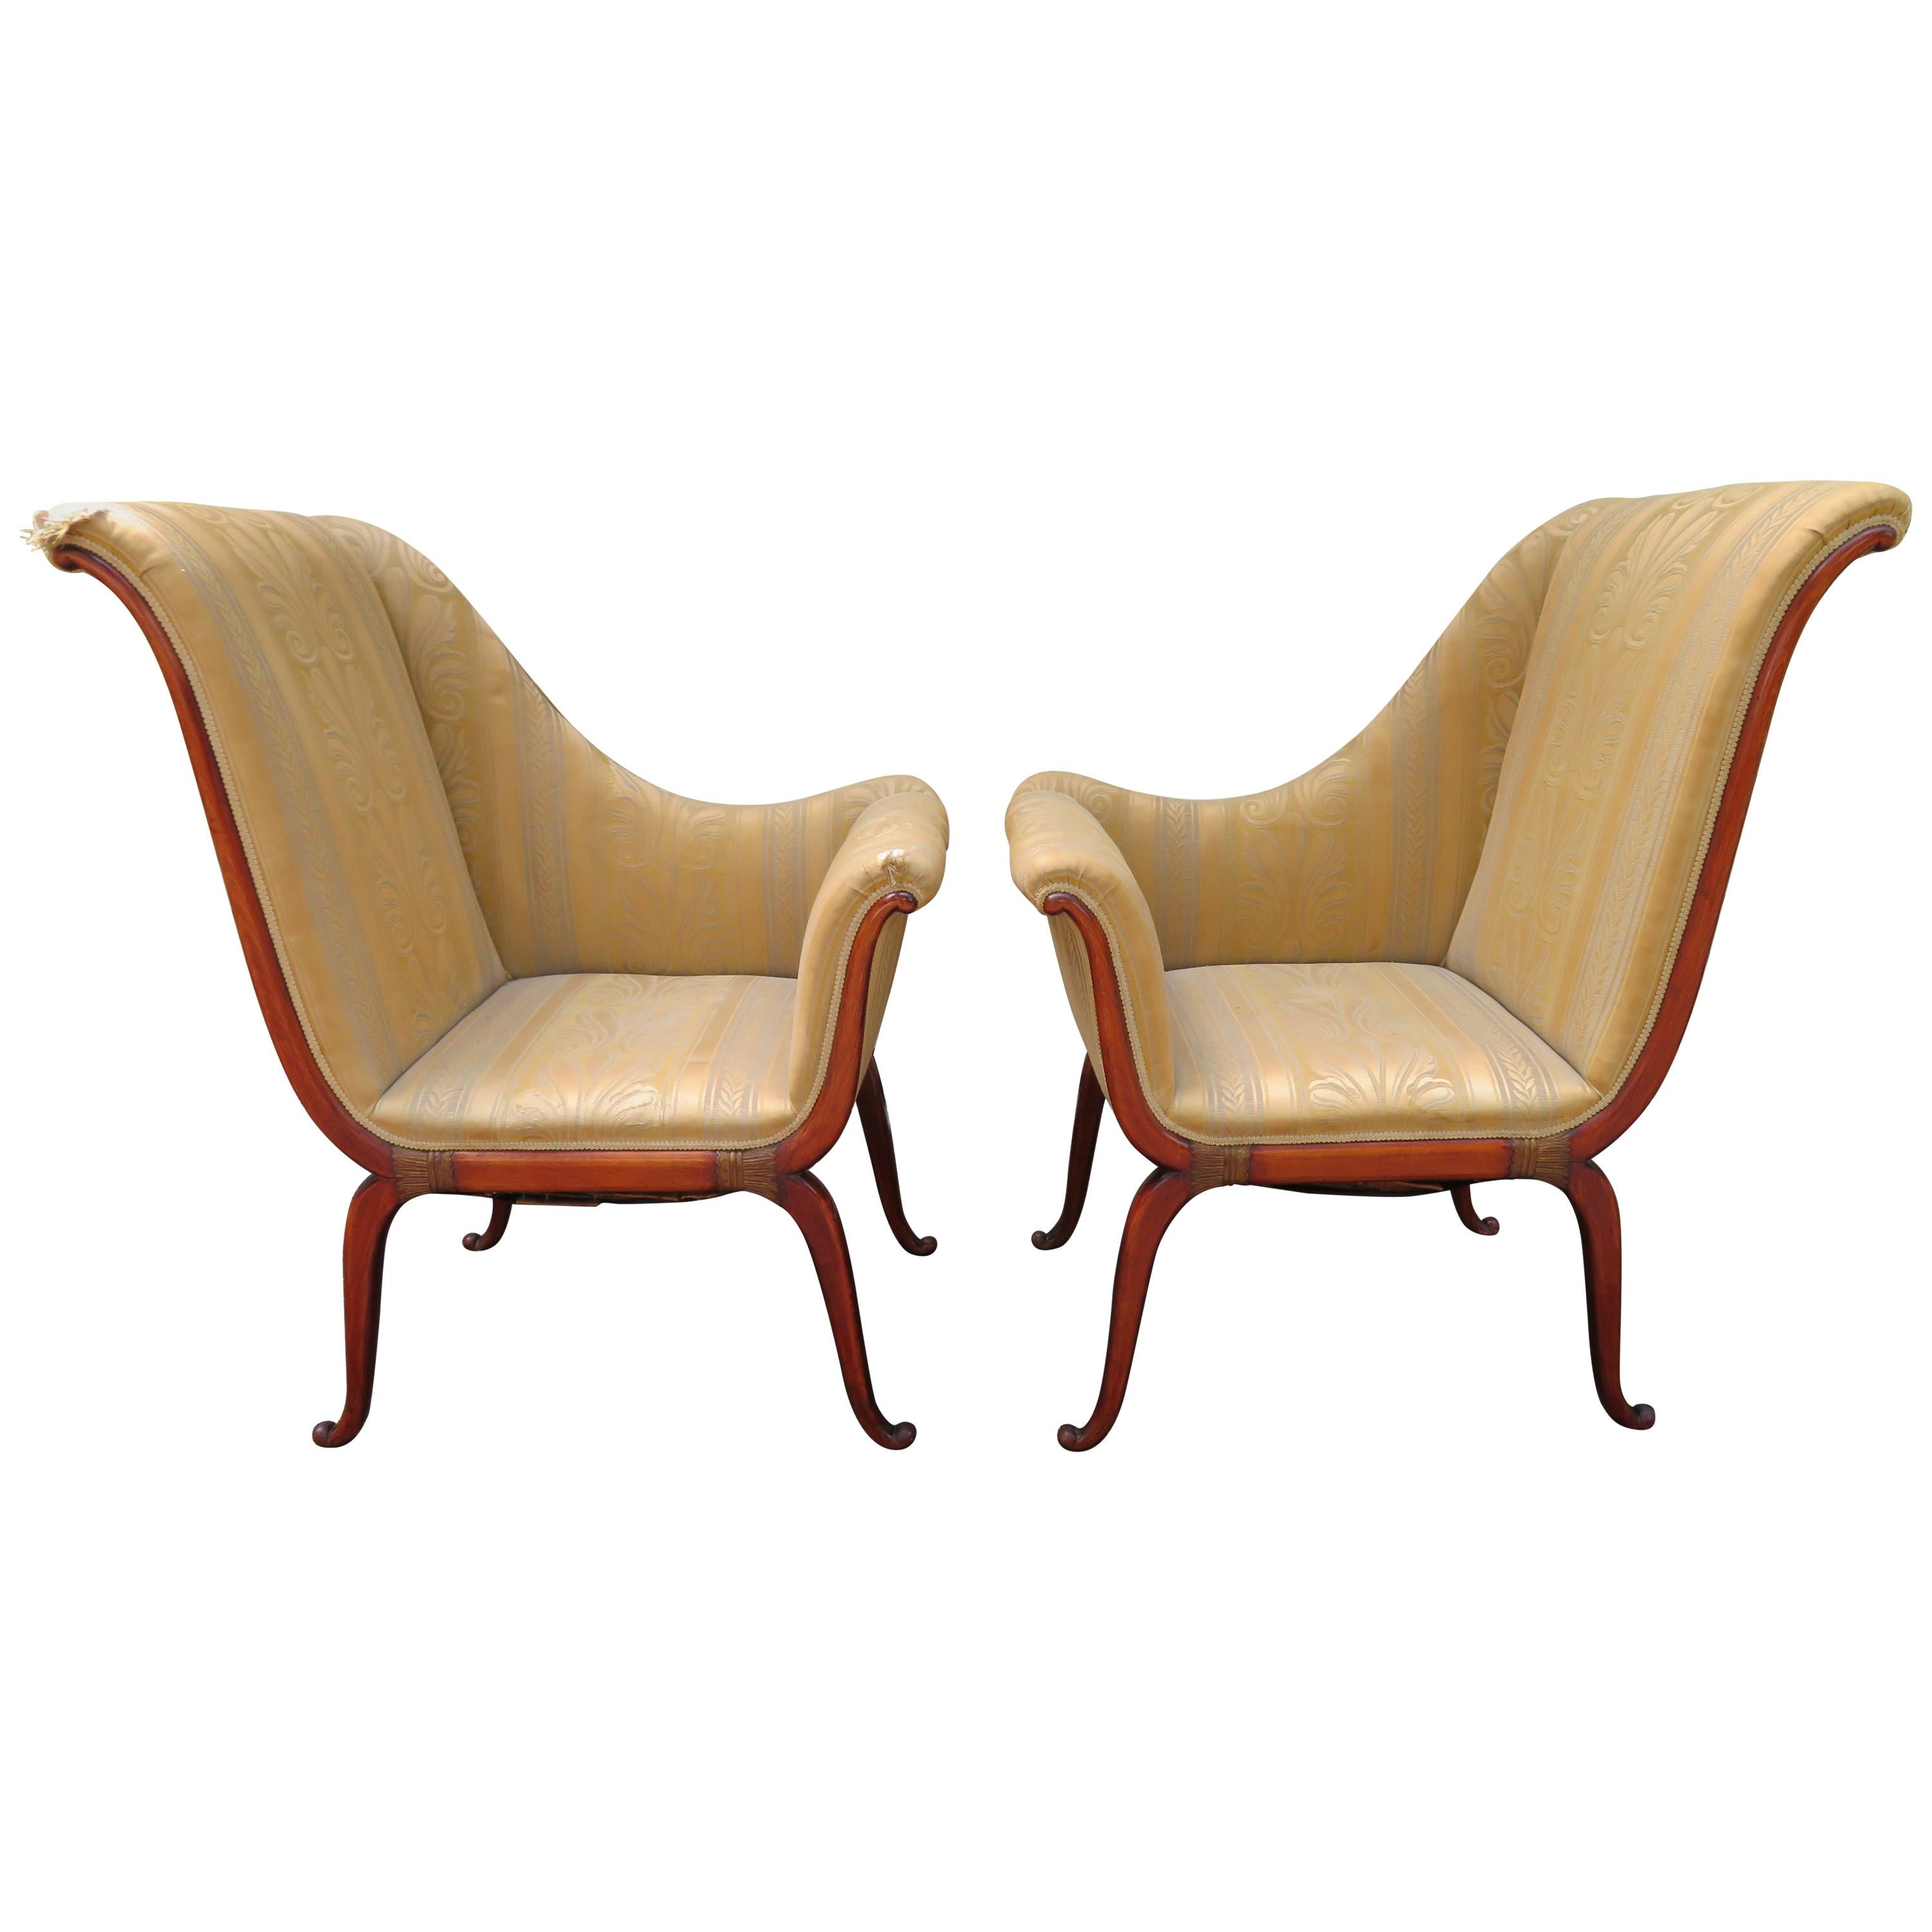 Stunning Left Right Hollywood Regency High Low Armchairs For Sale